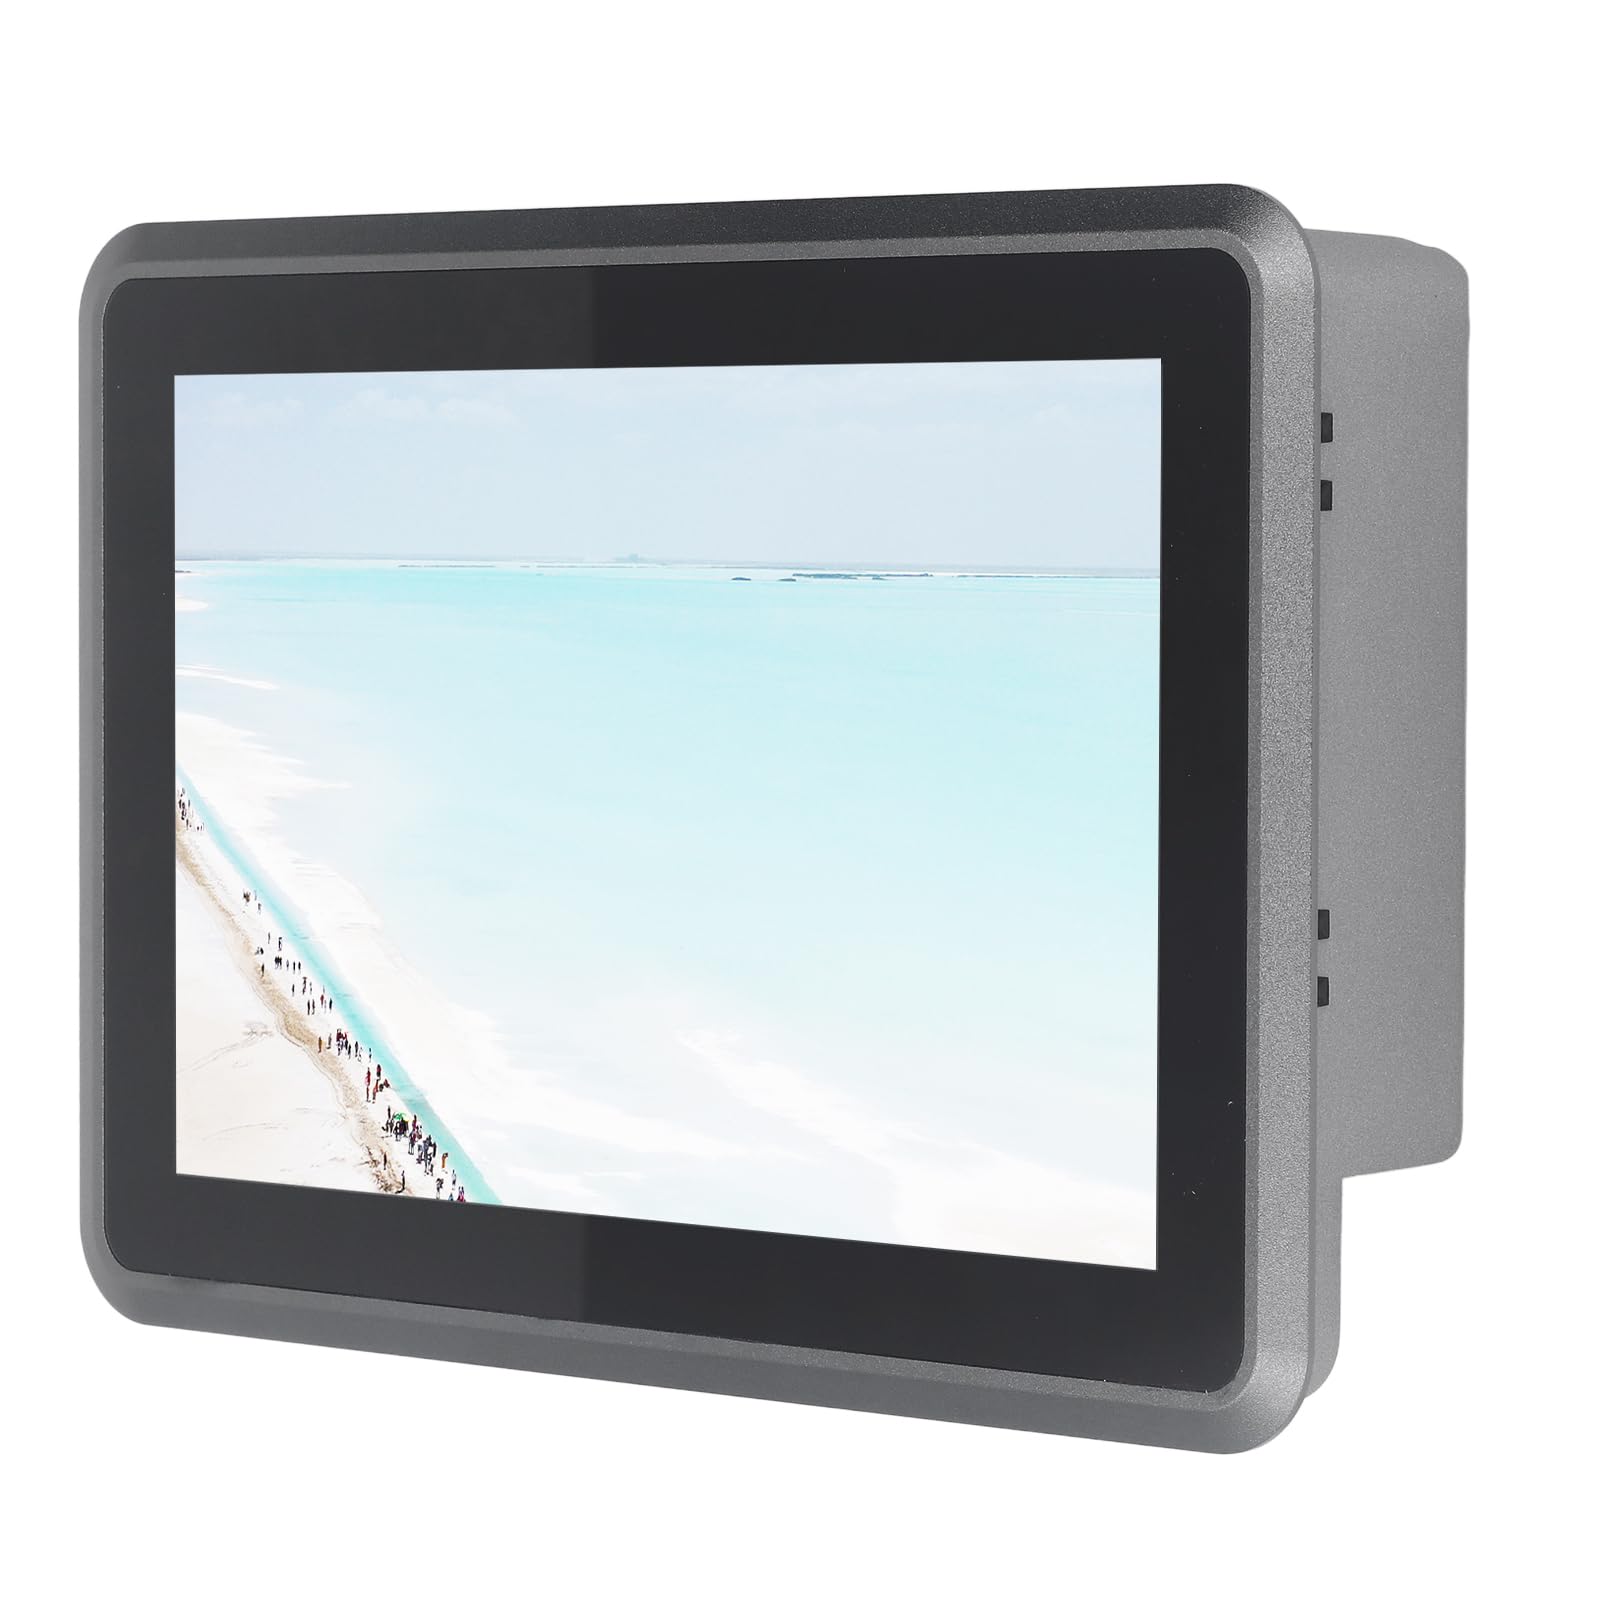 10.1in Industrial Tablet PC Aluminum Alloy Rugged Touchscreen Tablet 100‑240V (US Plug)